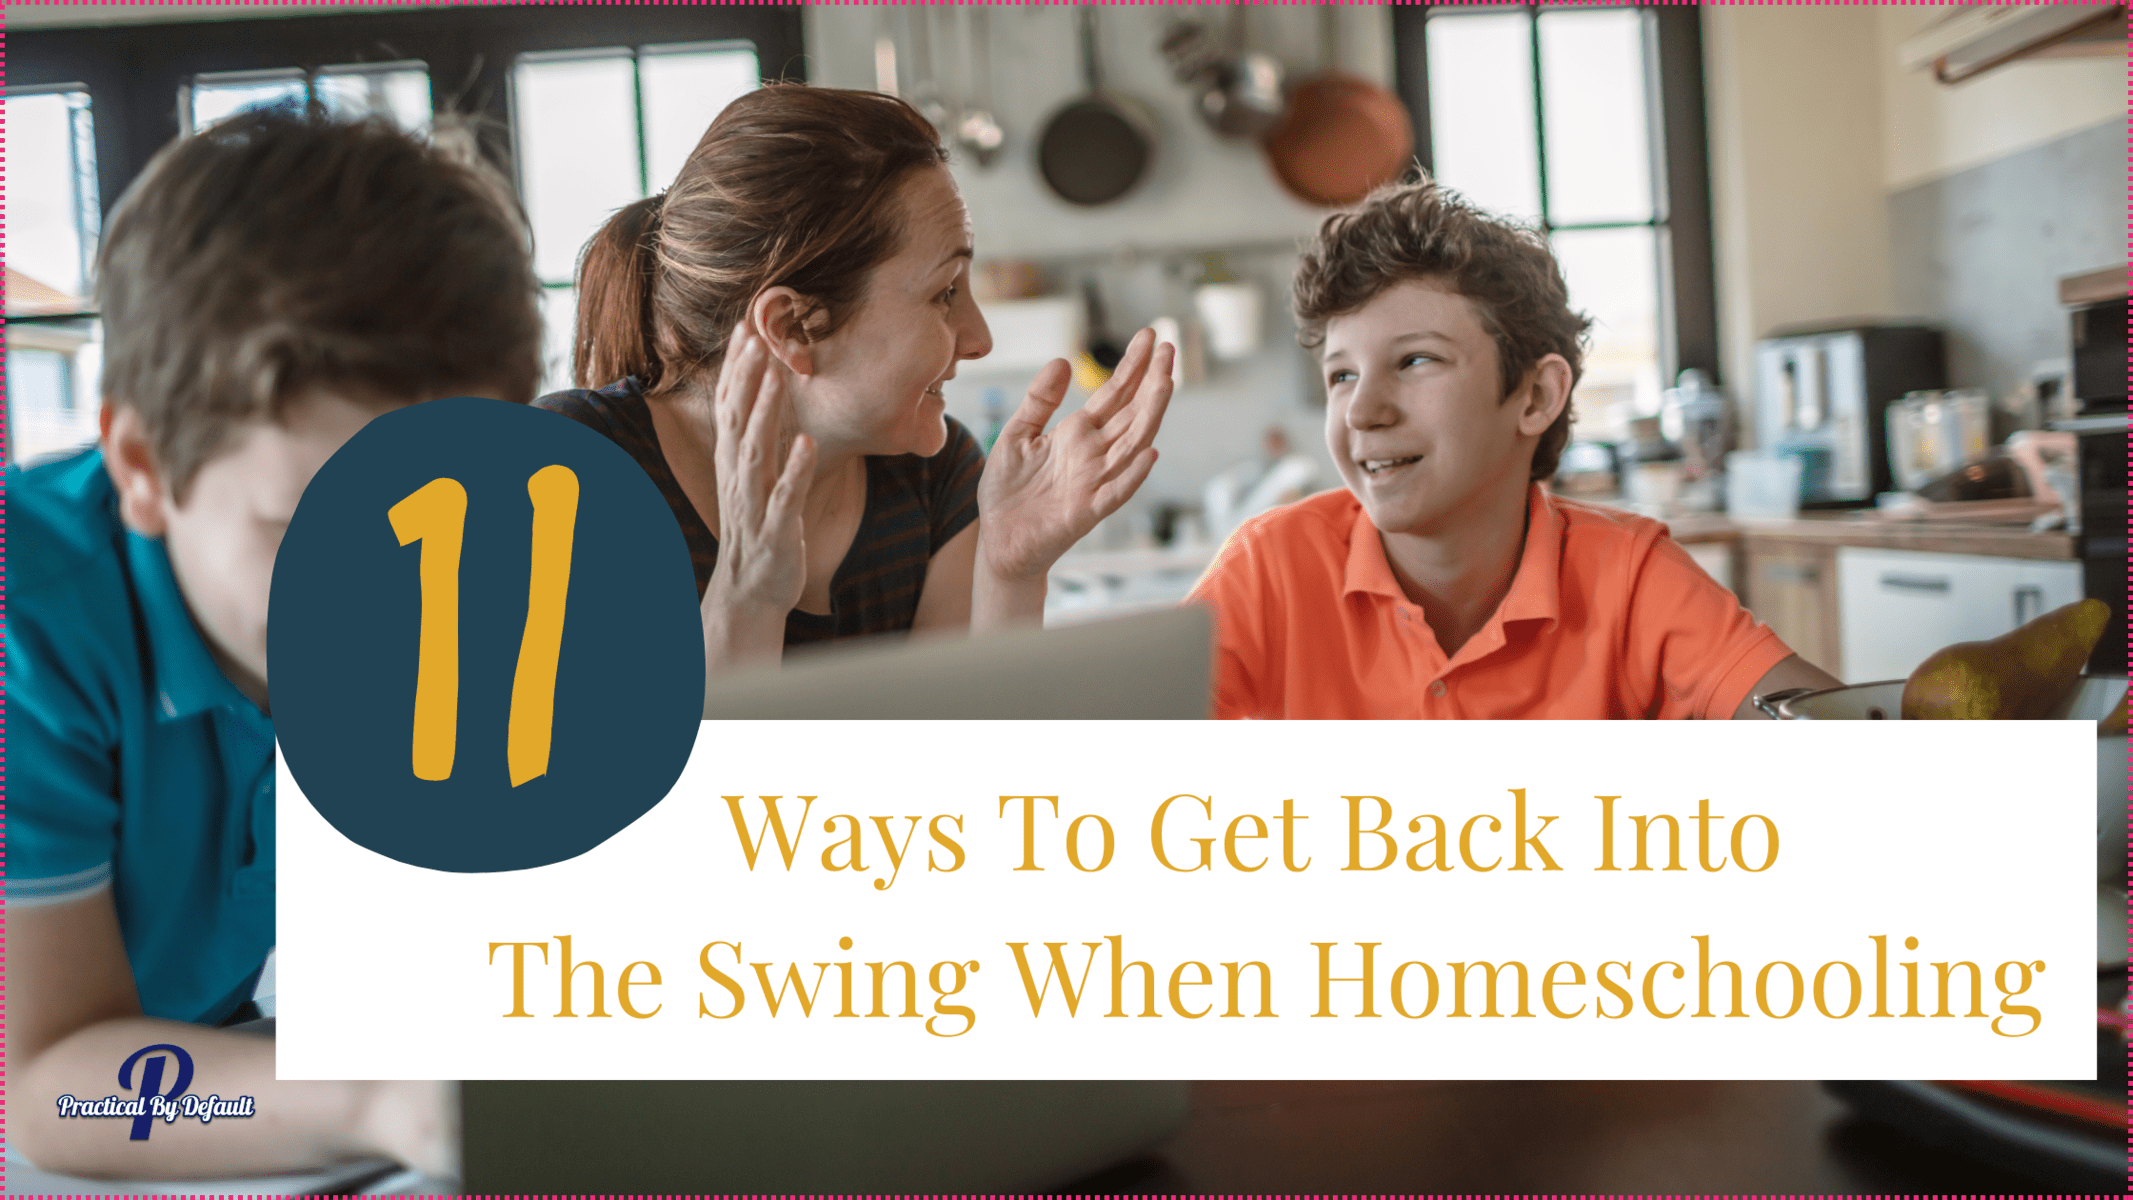 How To Get Ready For Back To Homeschool: 11 Helpful Ideas You Need To Try